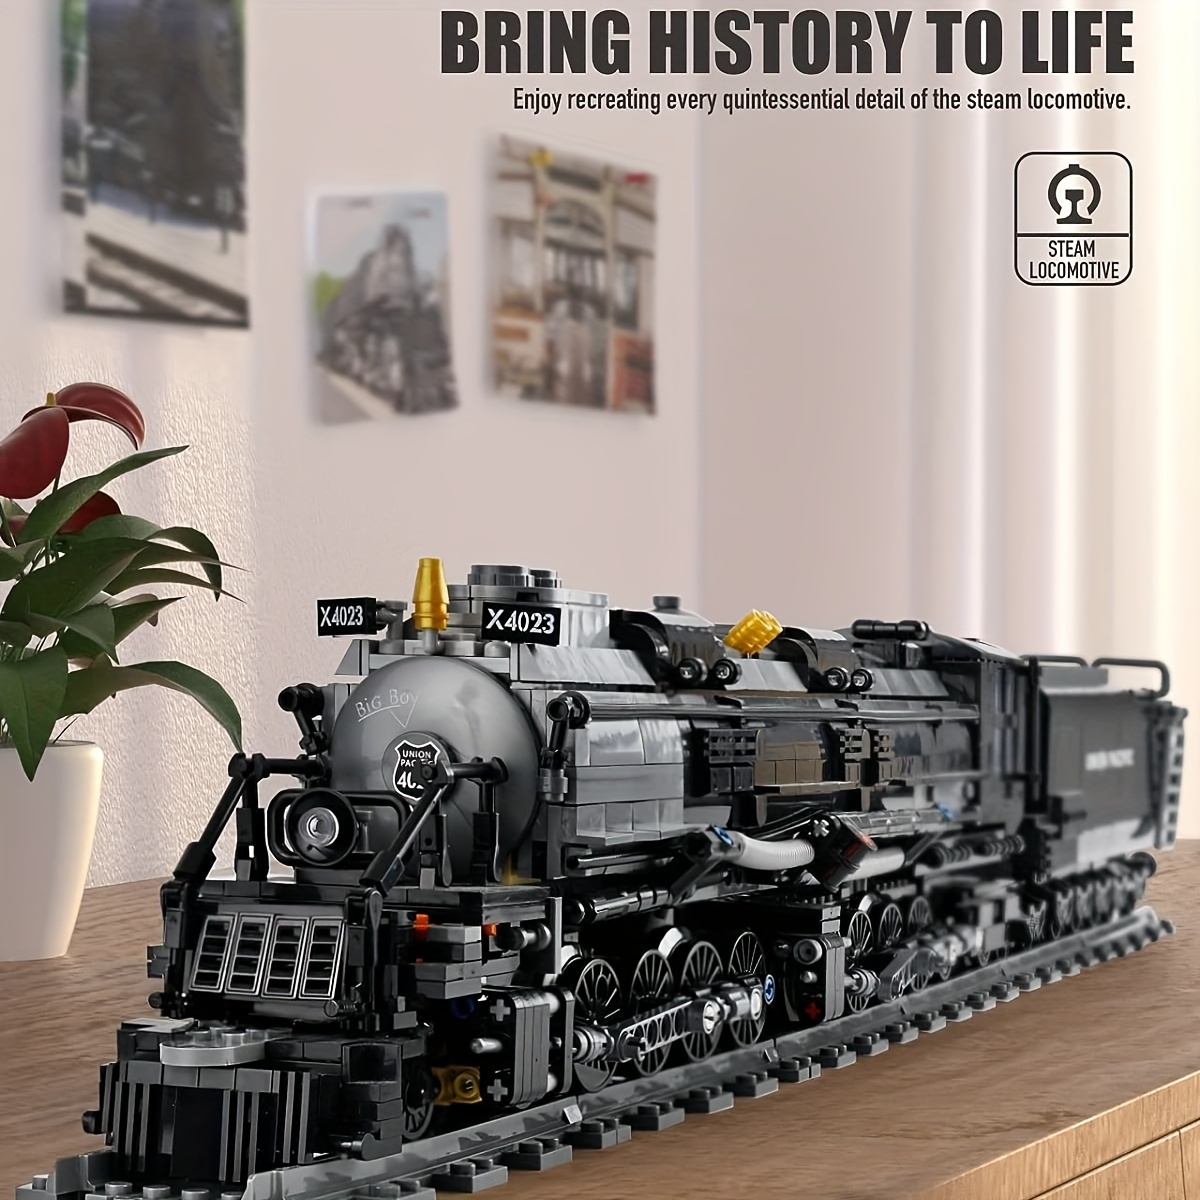 

1608pcs Bigboy Steam Train Construction Kit - Large Scale, Highly Detailed, Abs Material, Collectible Locomotive Display With - Ideal Gift For And Hobbyists